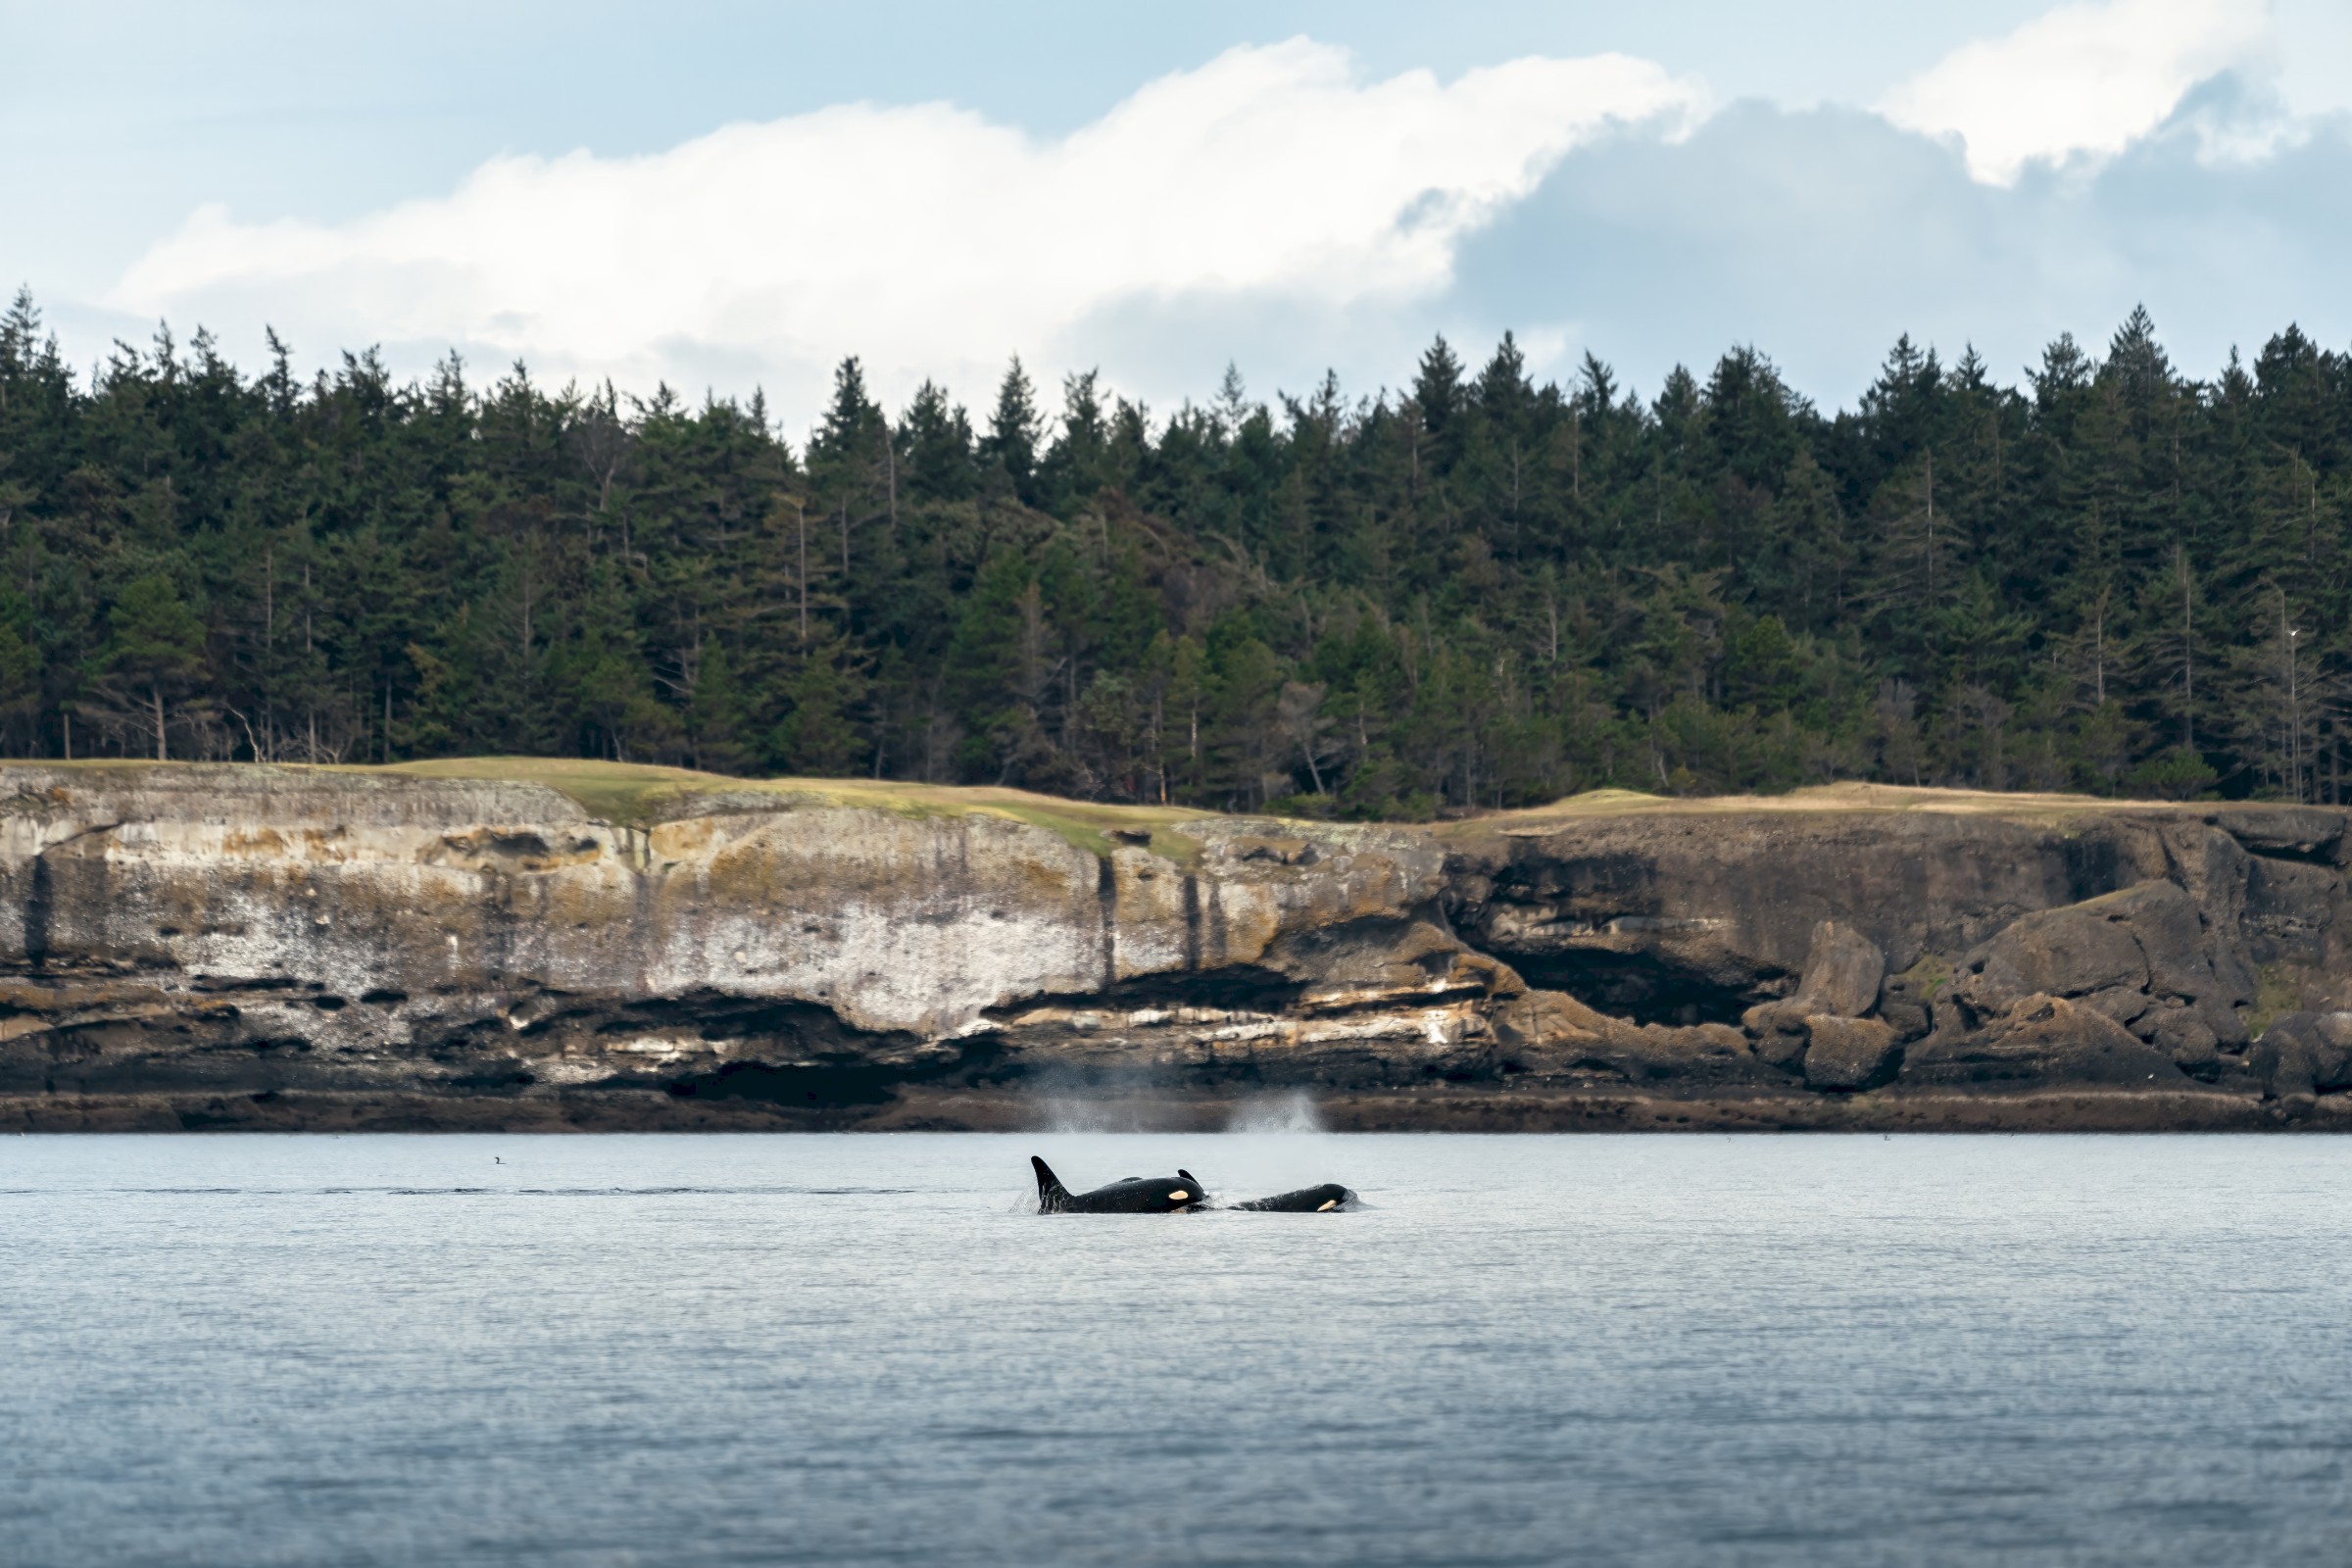 A pod of orcas off of the Comox Valley